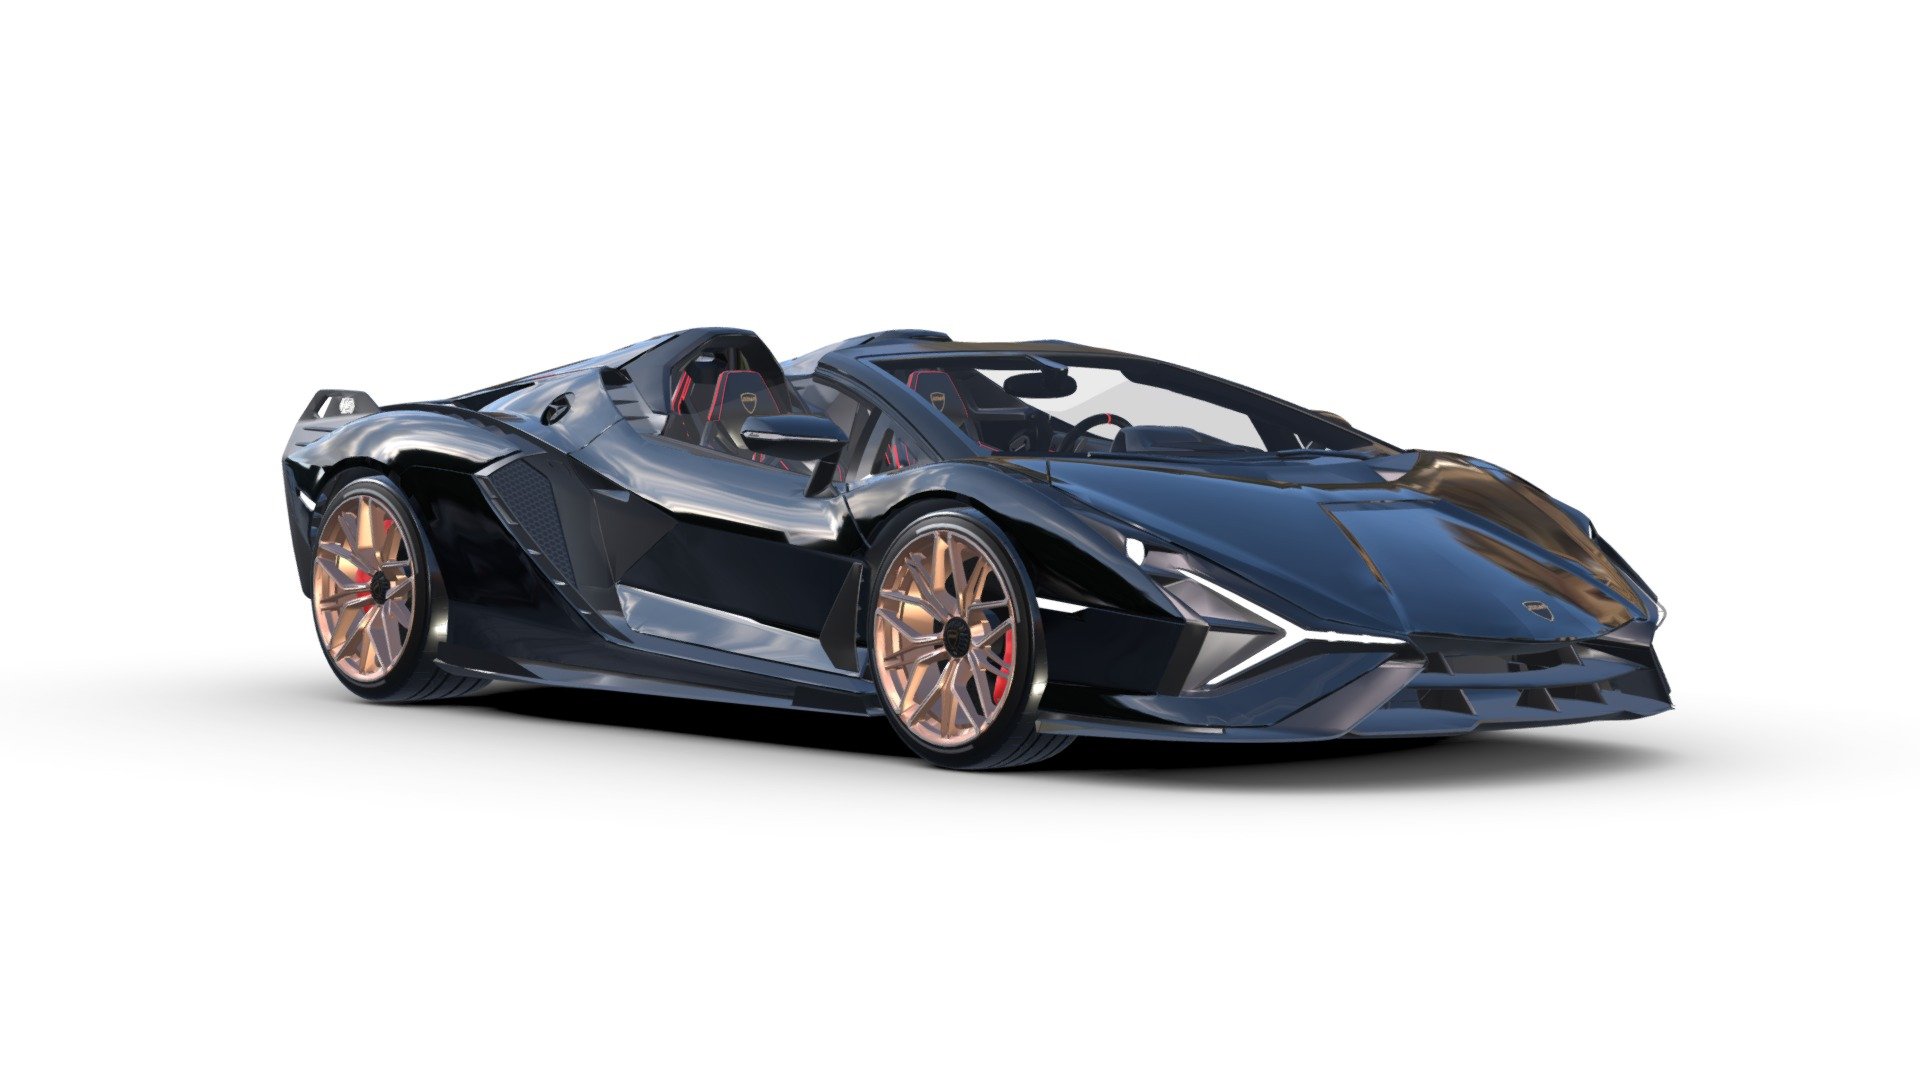 This 3D model shows the 2023 Lamborqhini Sian Roadster, the latest technological feat from the Italian supercar manufacturer. The Sian Roadster is a luxury hybrid car that combines power and elegance in iconic Lamborghini style. This model has been carefully reproduced in a 3D environment, taking into account every detail and shape, which makes it an impressive work of art. This is a perfect example of advanced 3D modeling that impresses with its detailed accuracy and faithfulness to the original.

Customer reviews are extremely important for the development and improvement of services. If you purchased a 3D model in my store, I encourage you to share your opinion by leaving a rating (stars). This will help me understand your expectations and adapt
 offer to suit your needs. Thank you for your time and support! - 3d model supercar Sian Roadster VR ready - 3D model by zizian 3d model